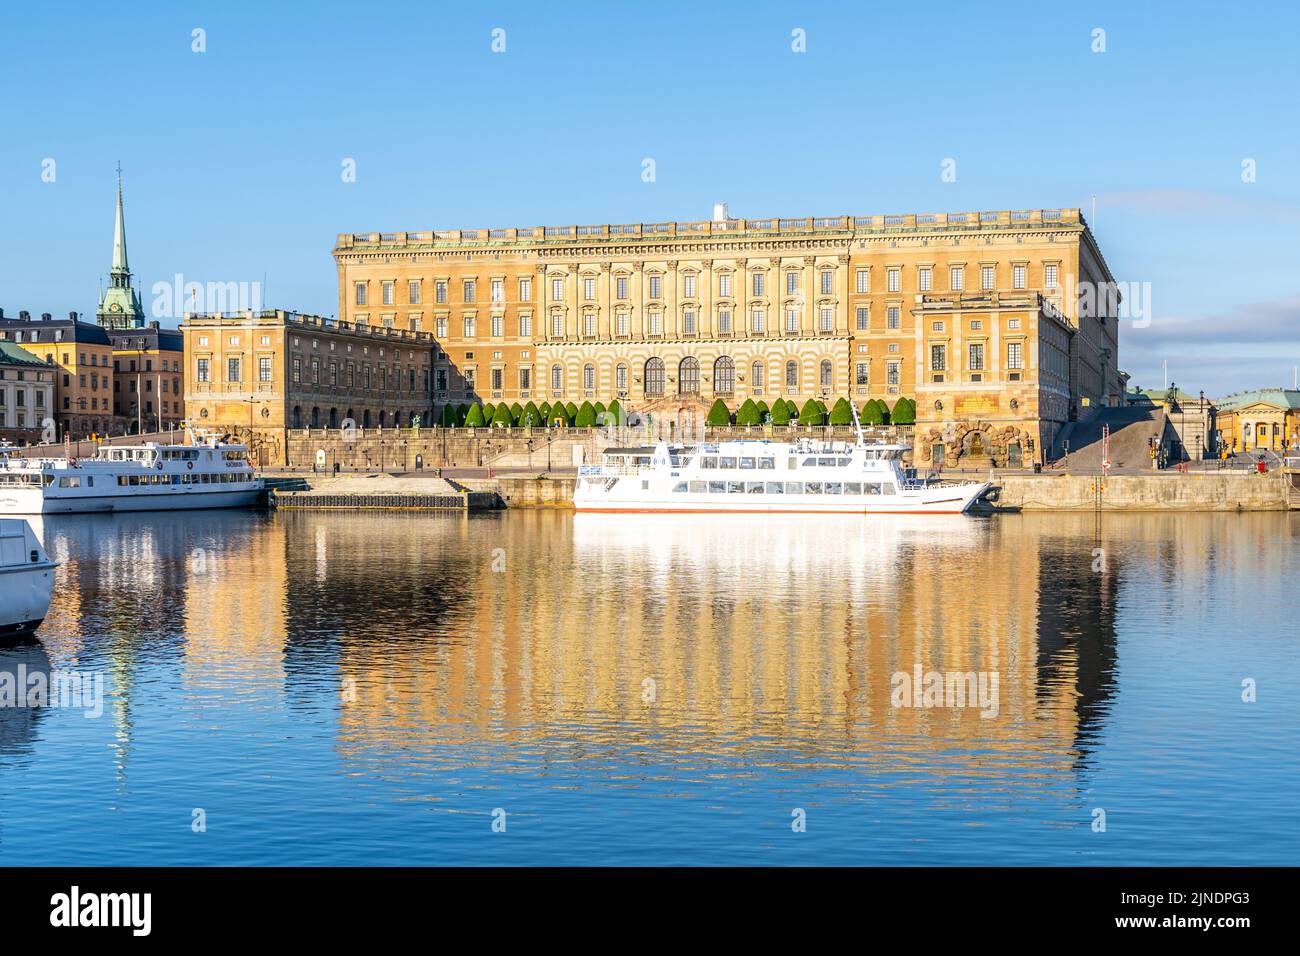 Royal Palace of Sweden in Stockholm Stock Photo